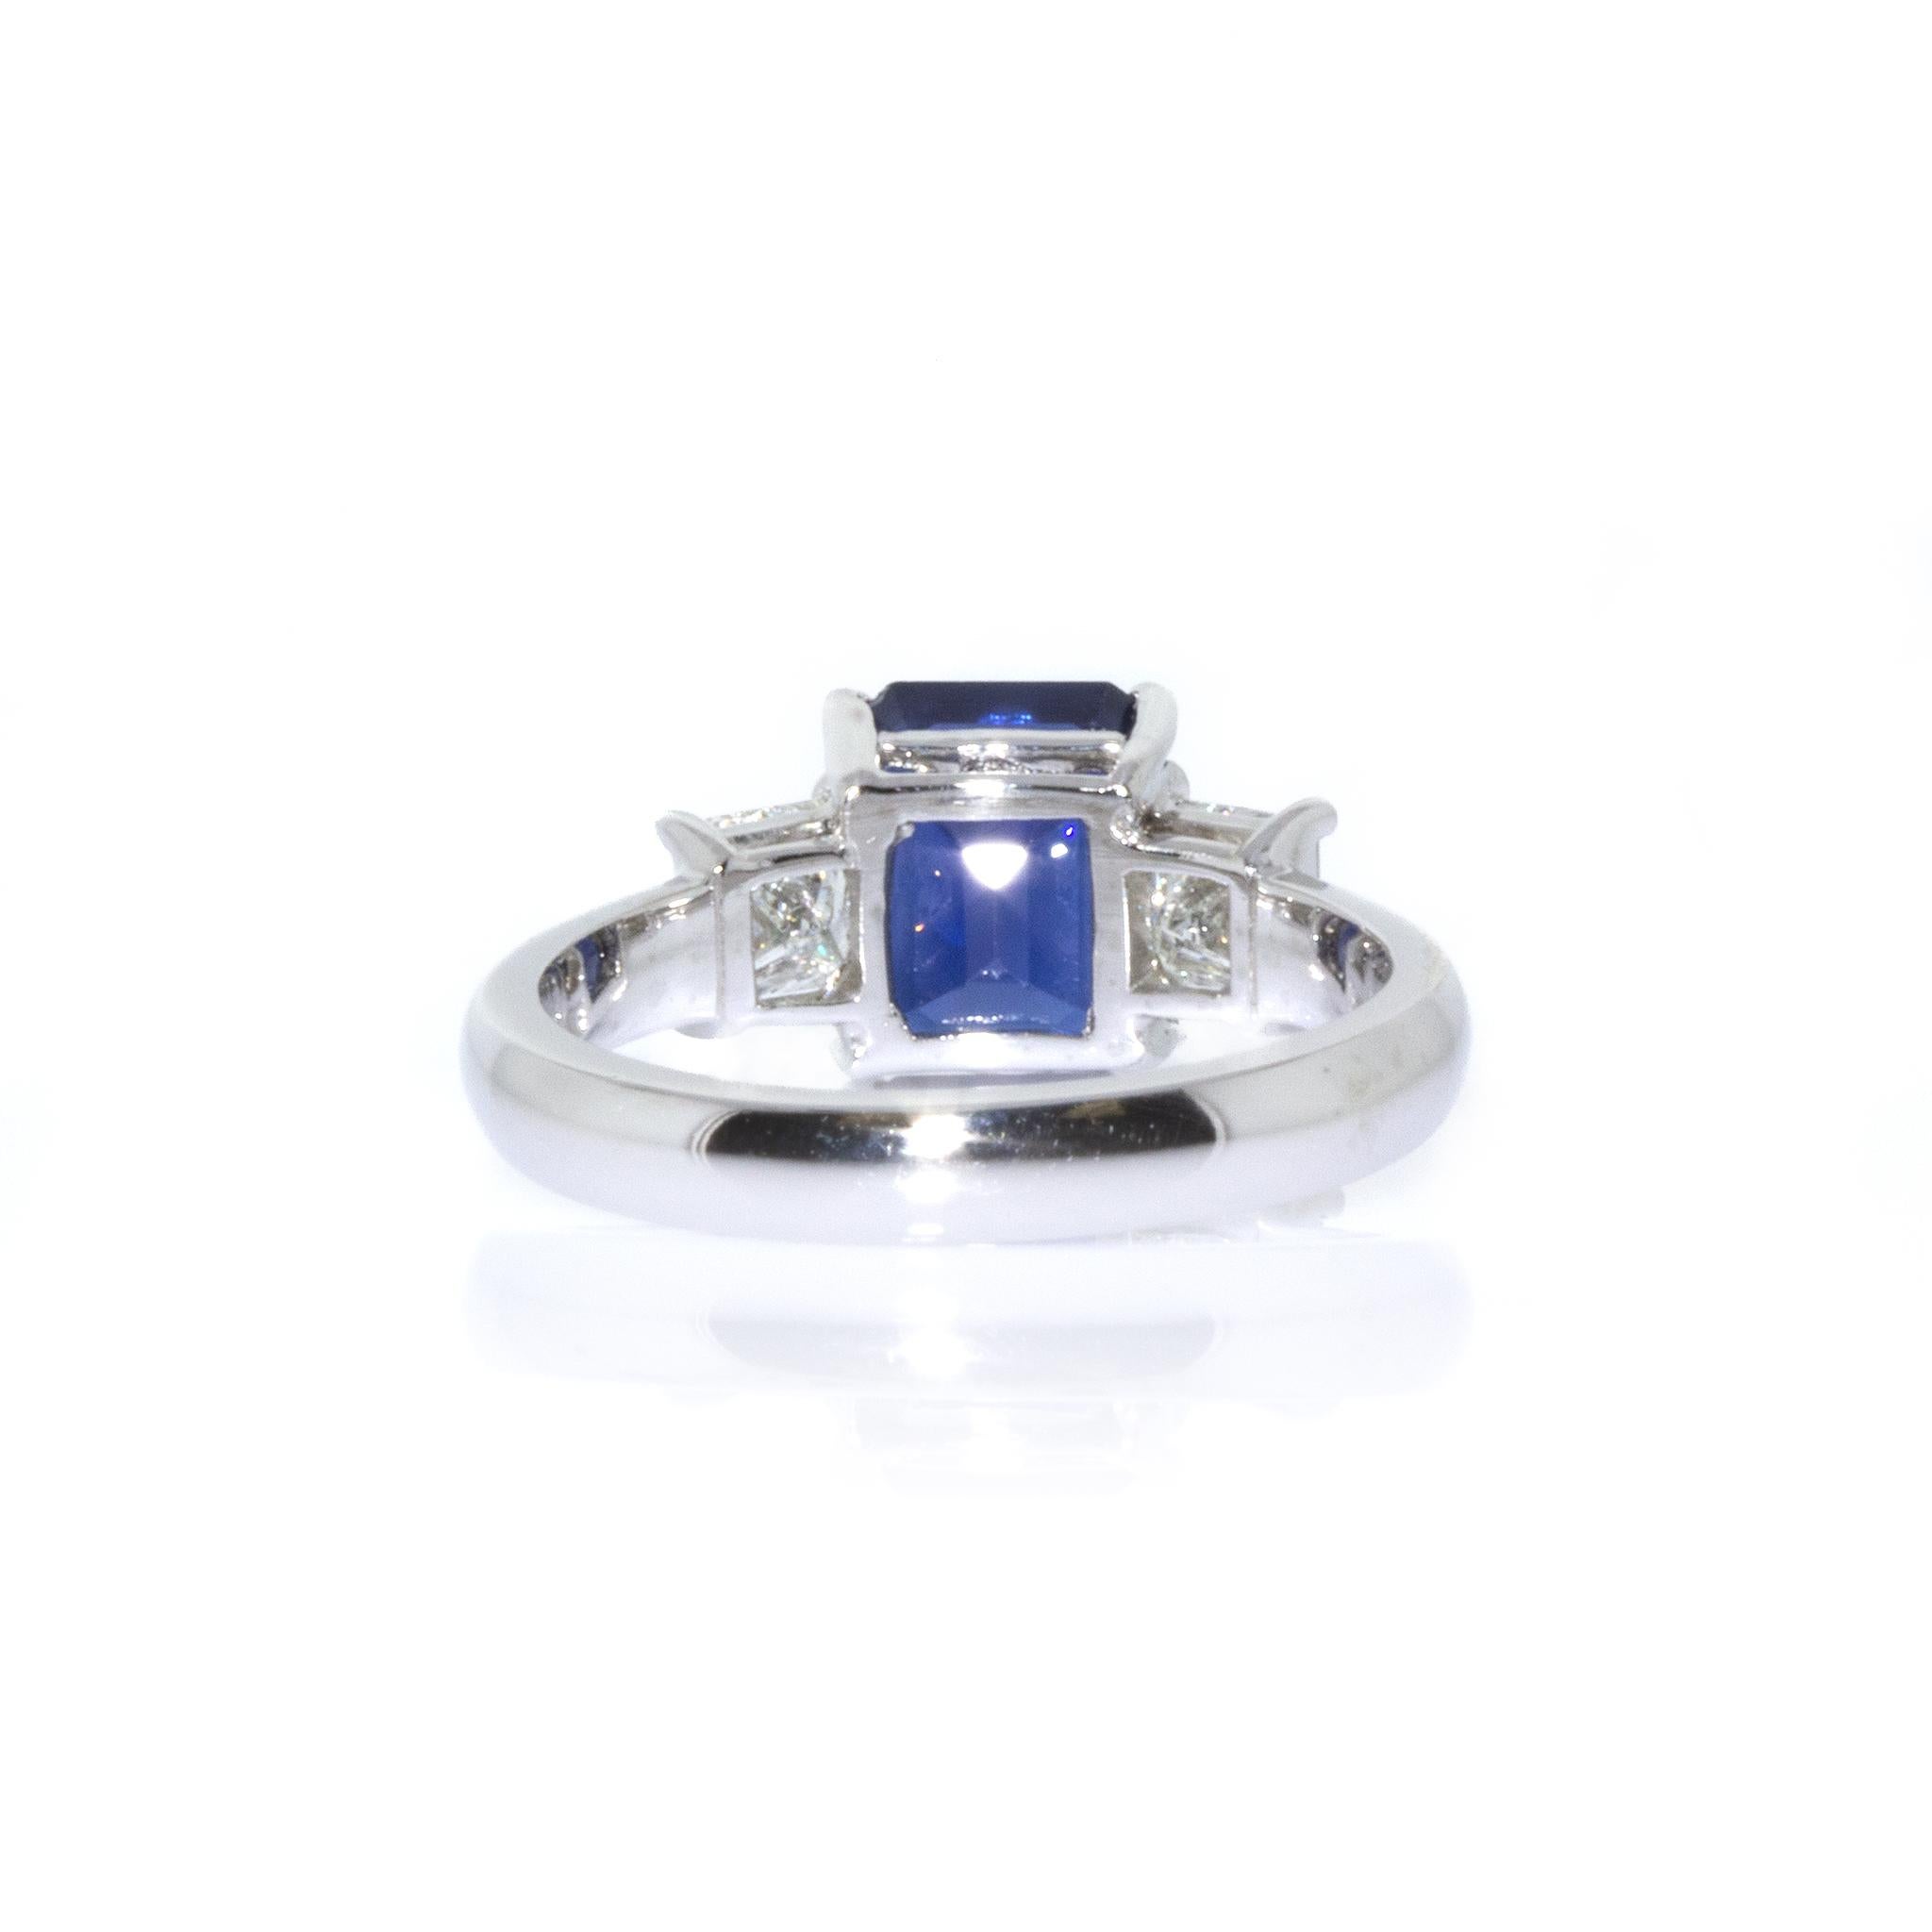 METAL TYPE: Platinum
STONE WEIGHT: Diamond - 0.74 ct twd / Sapphire - 2.45ct twd
TOTAL WEIGHT: 5.9g
RING SIZE: 6